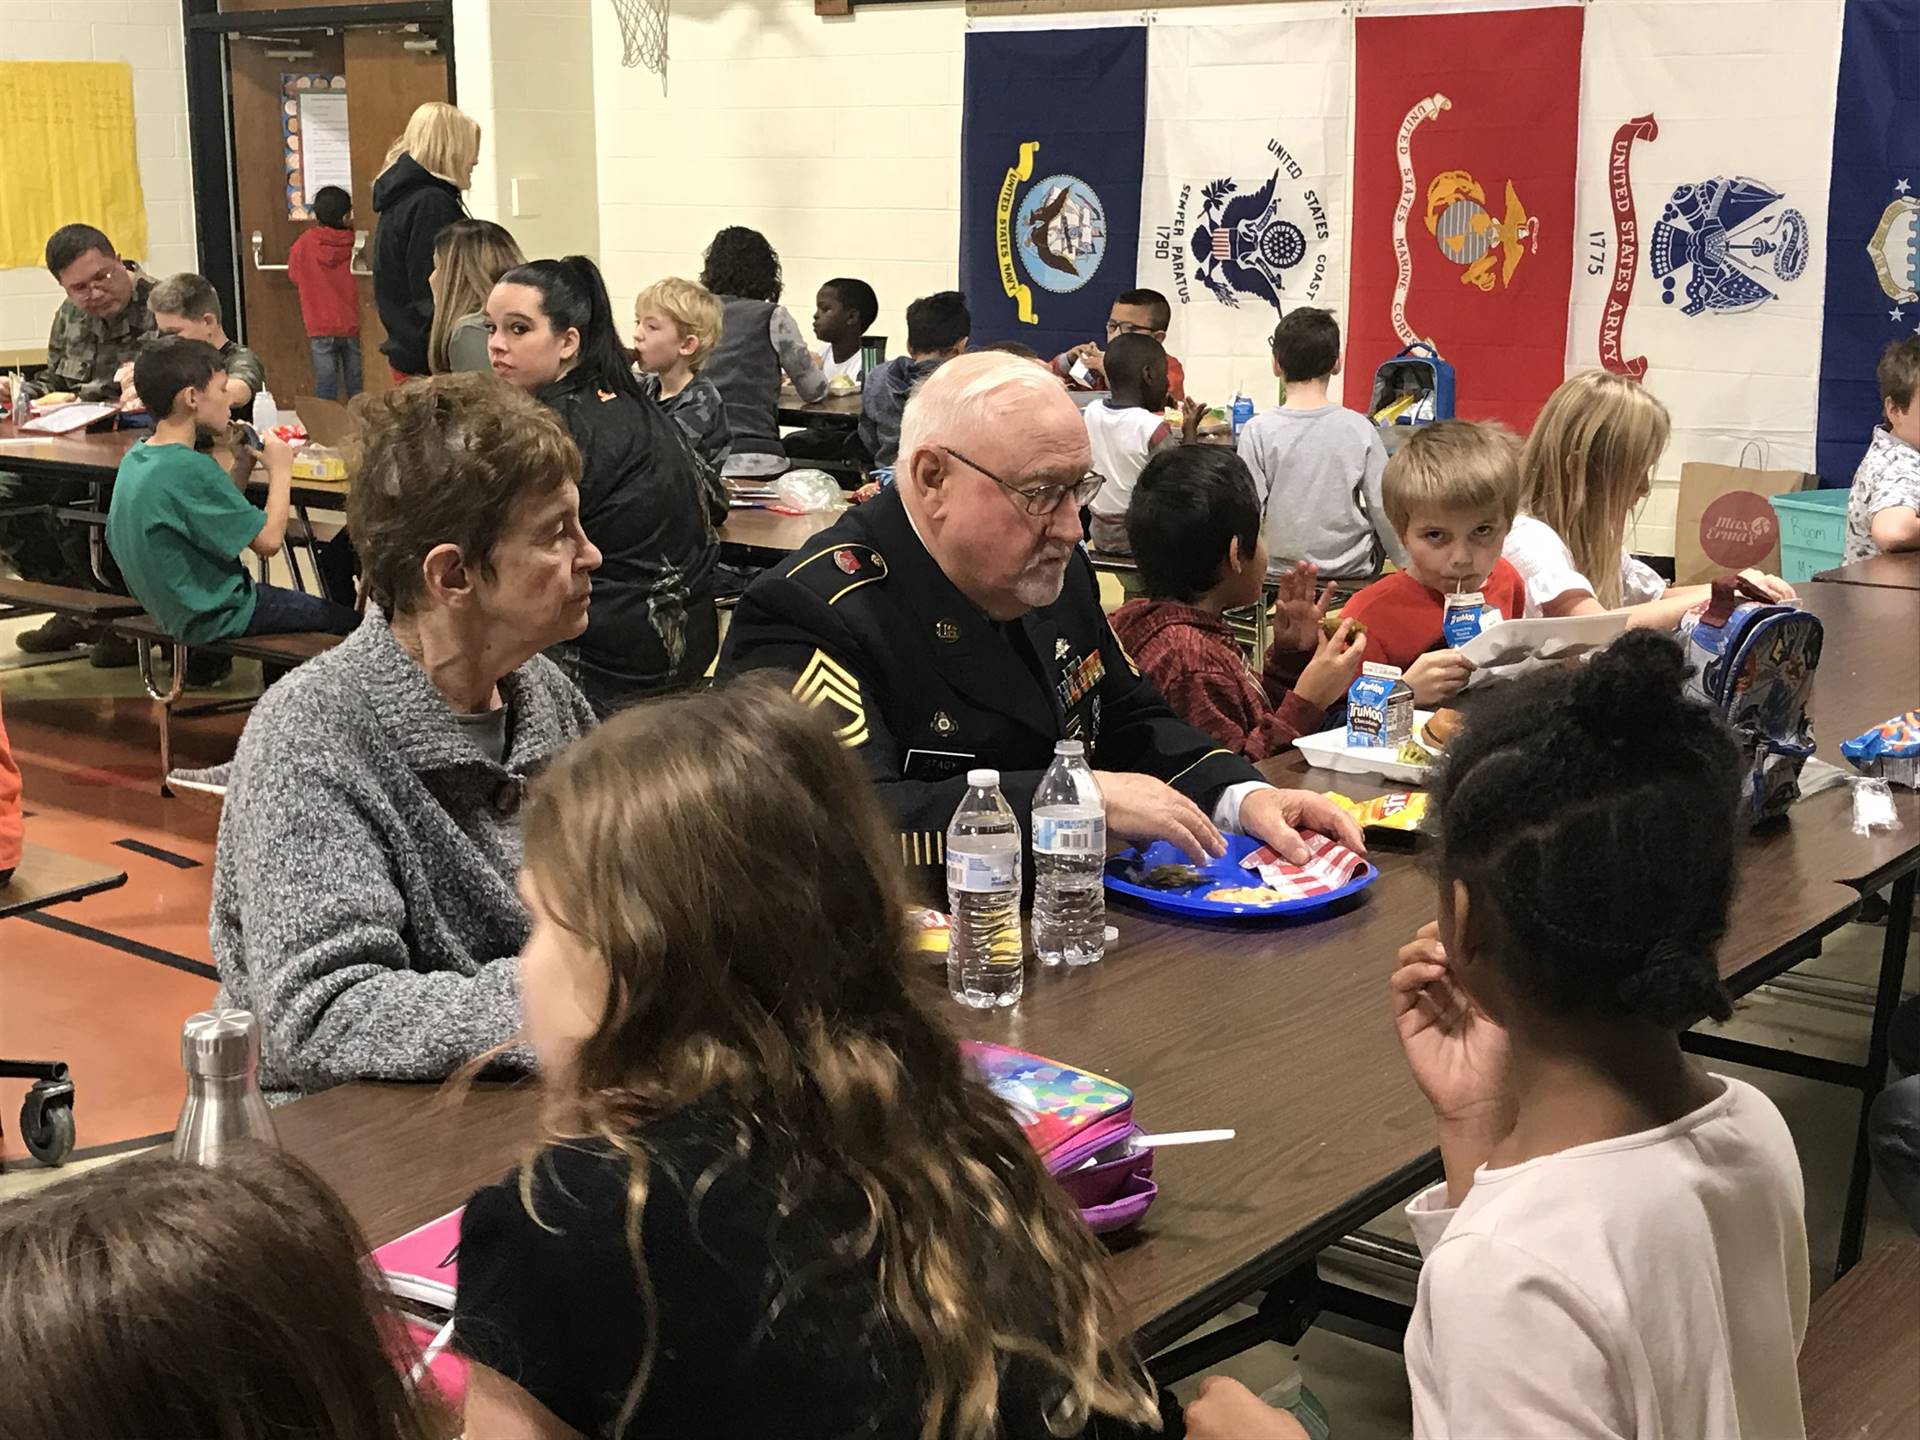 Veterans eating lunch with students